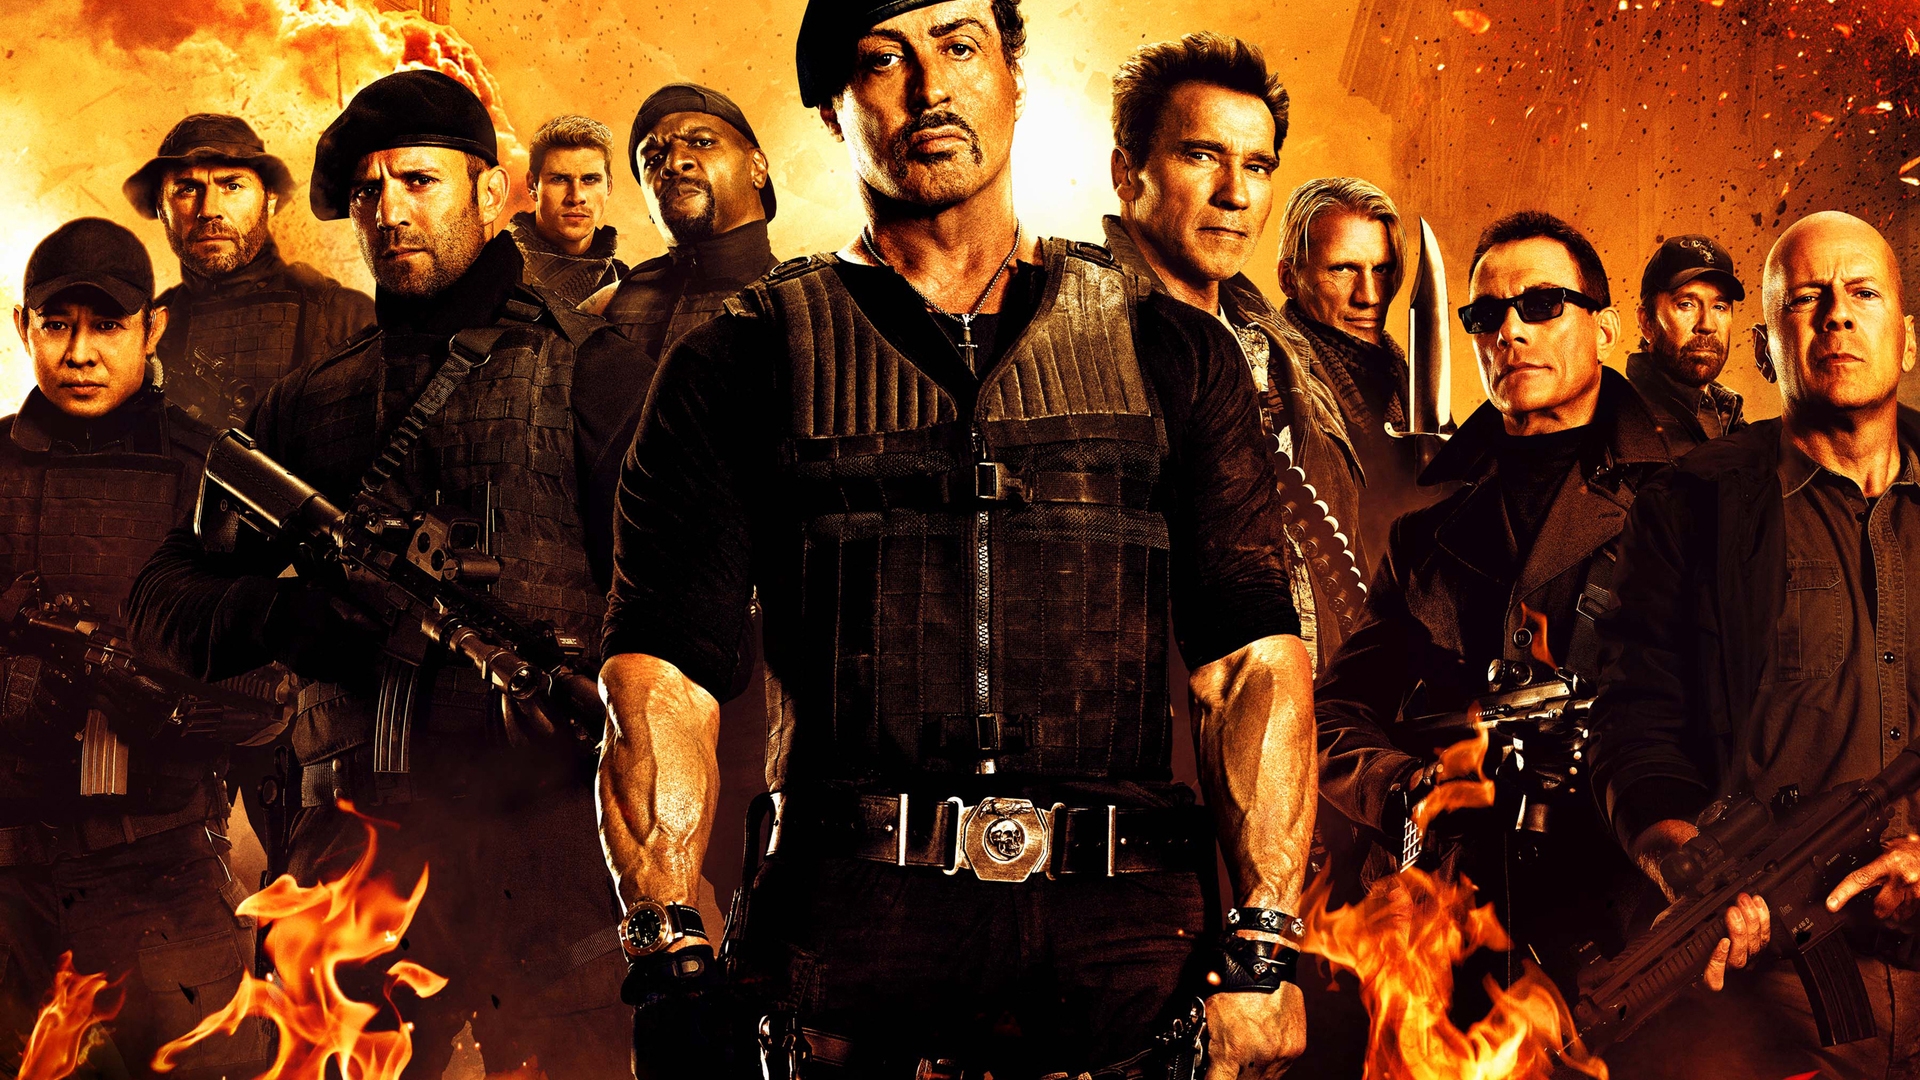 The Expendables 2 Film for 1920 x 1080 HDTV 1080p resolution